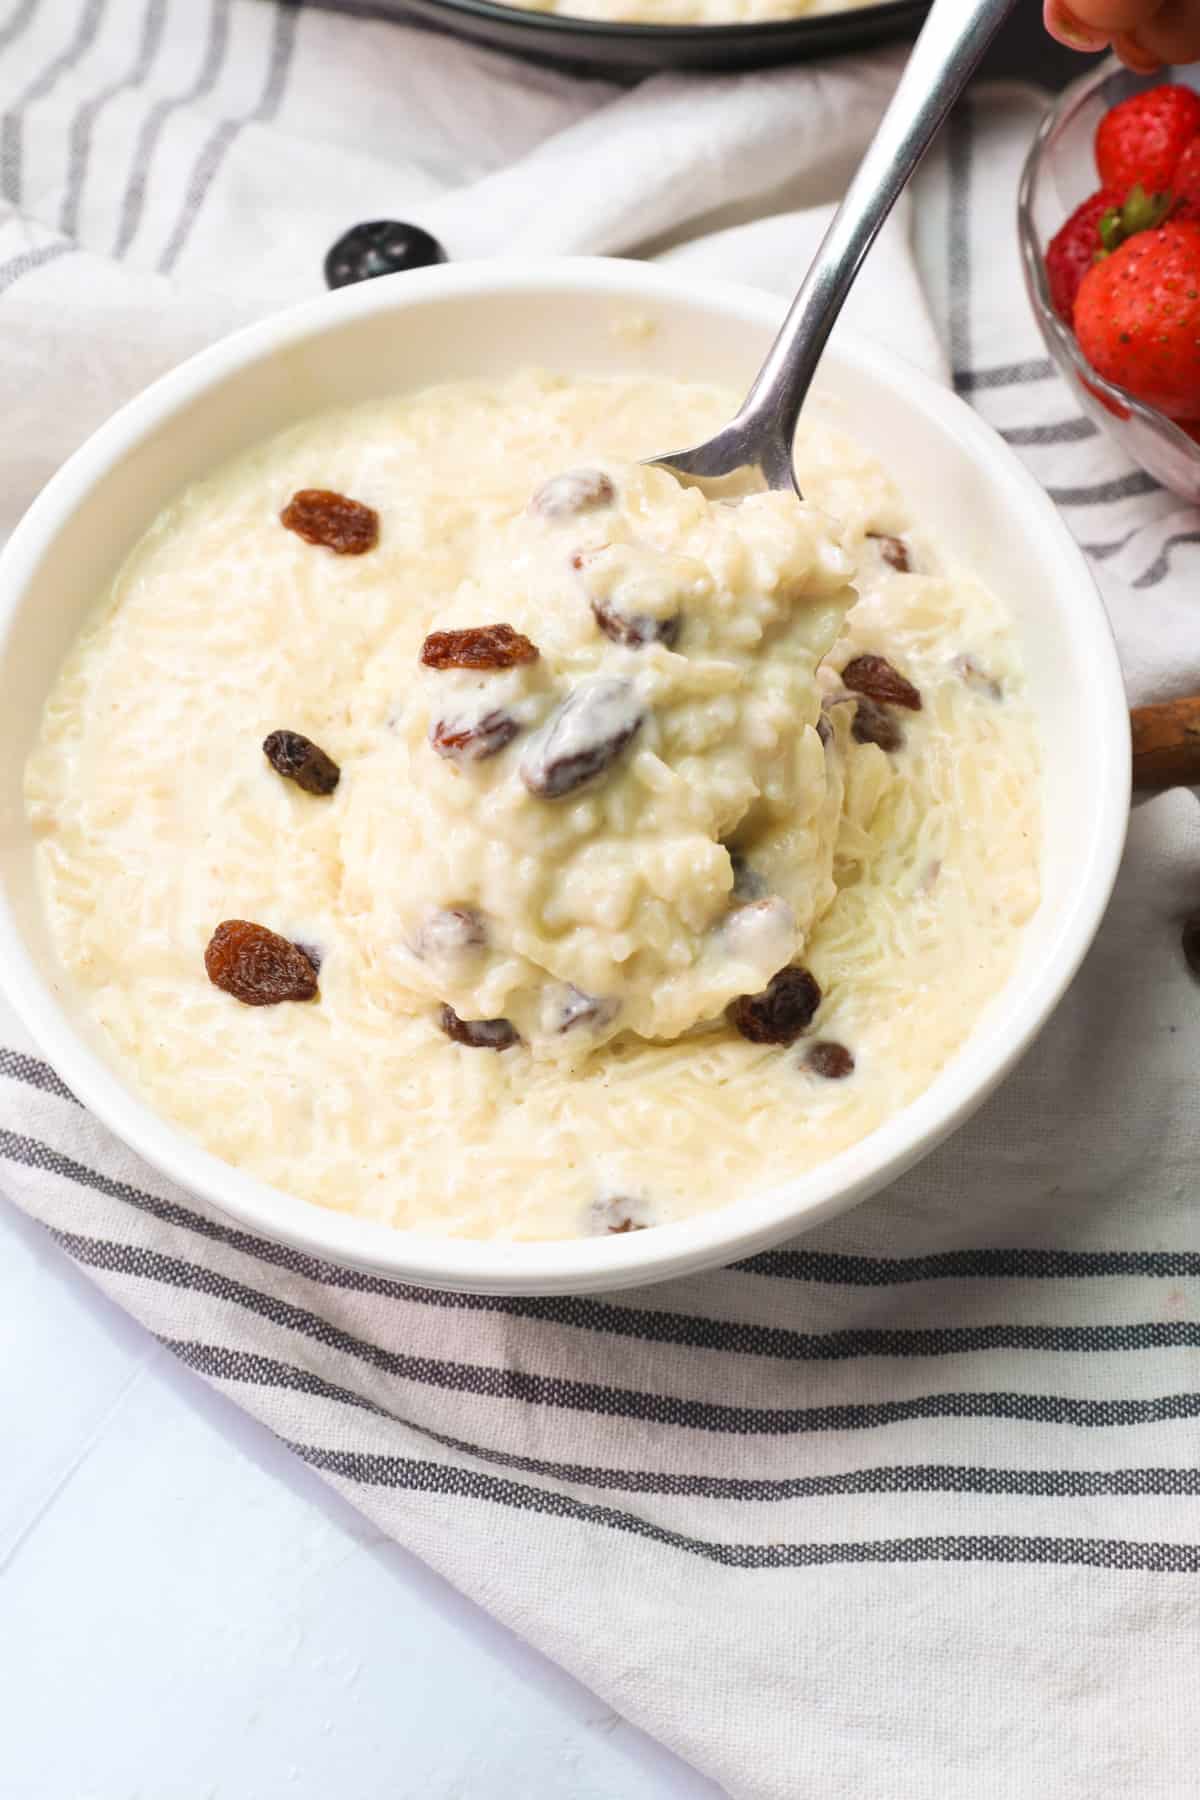 Rice pudding makes a creamy, quick and easy snack